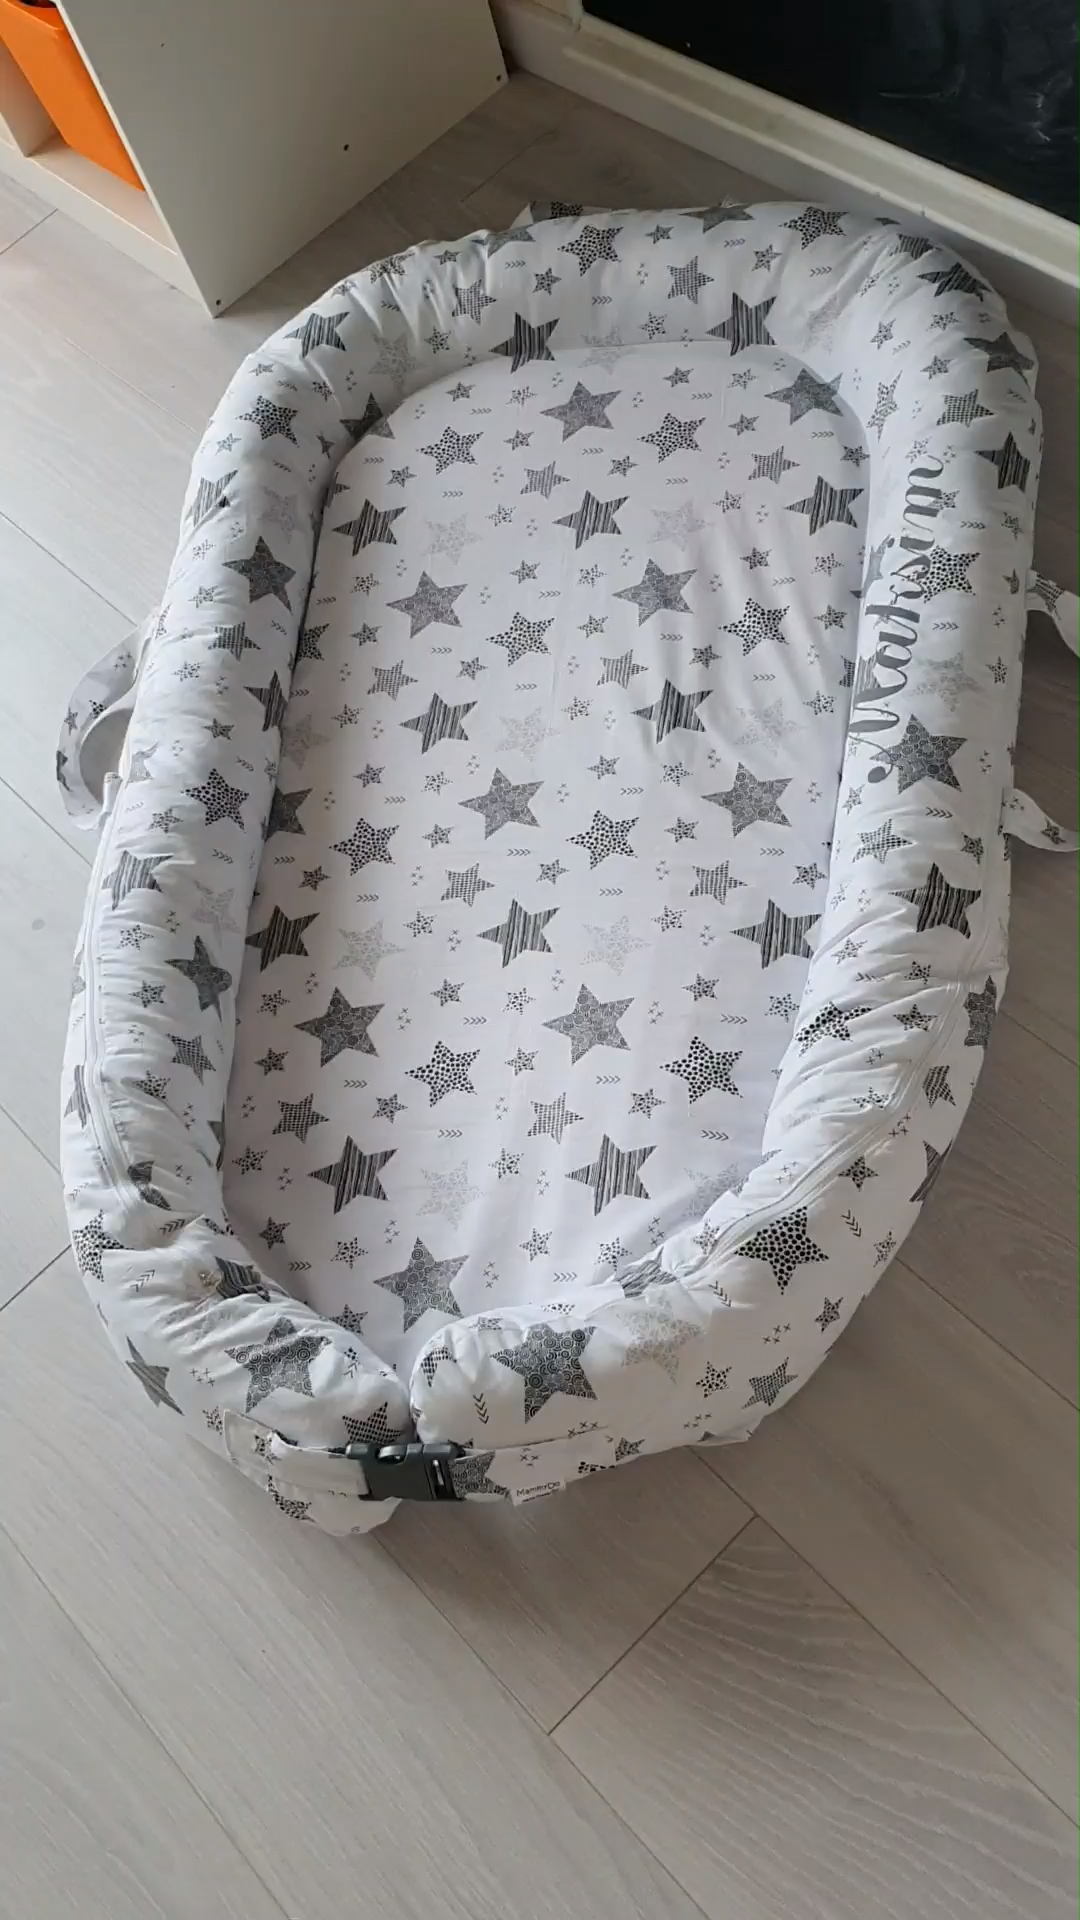 Custom Baby nest with removable cover Stars Cosleeper Snuggle nest Baby lounger Toddler kid bed - Custom Baby nest with removable cover Stars Cosleeper Snuggle nest Baby lounger Toddler kid bed -   16 diy Baby bed ideas